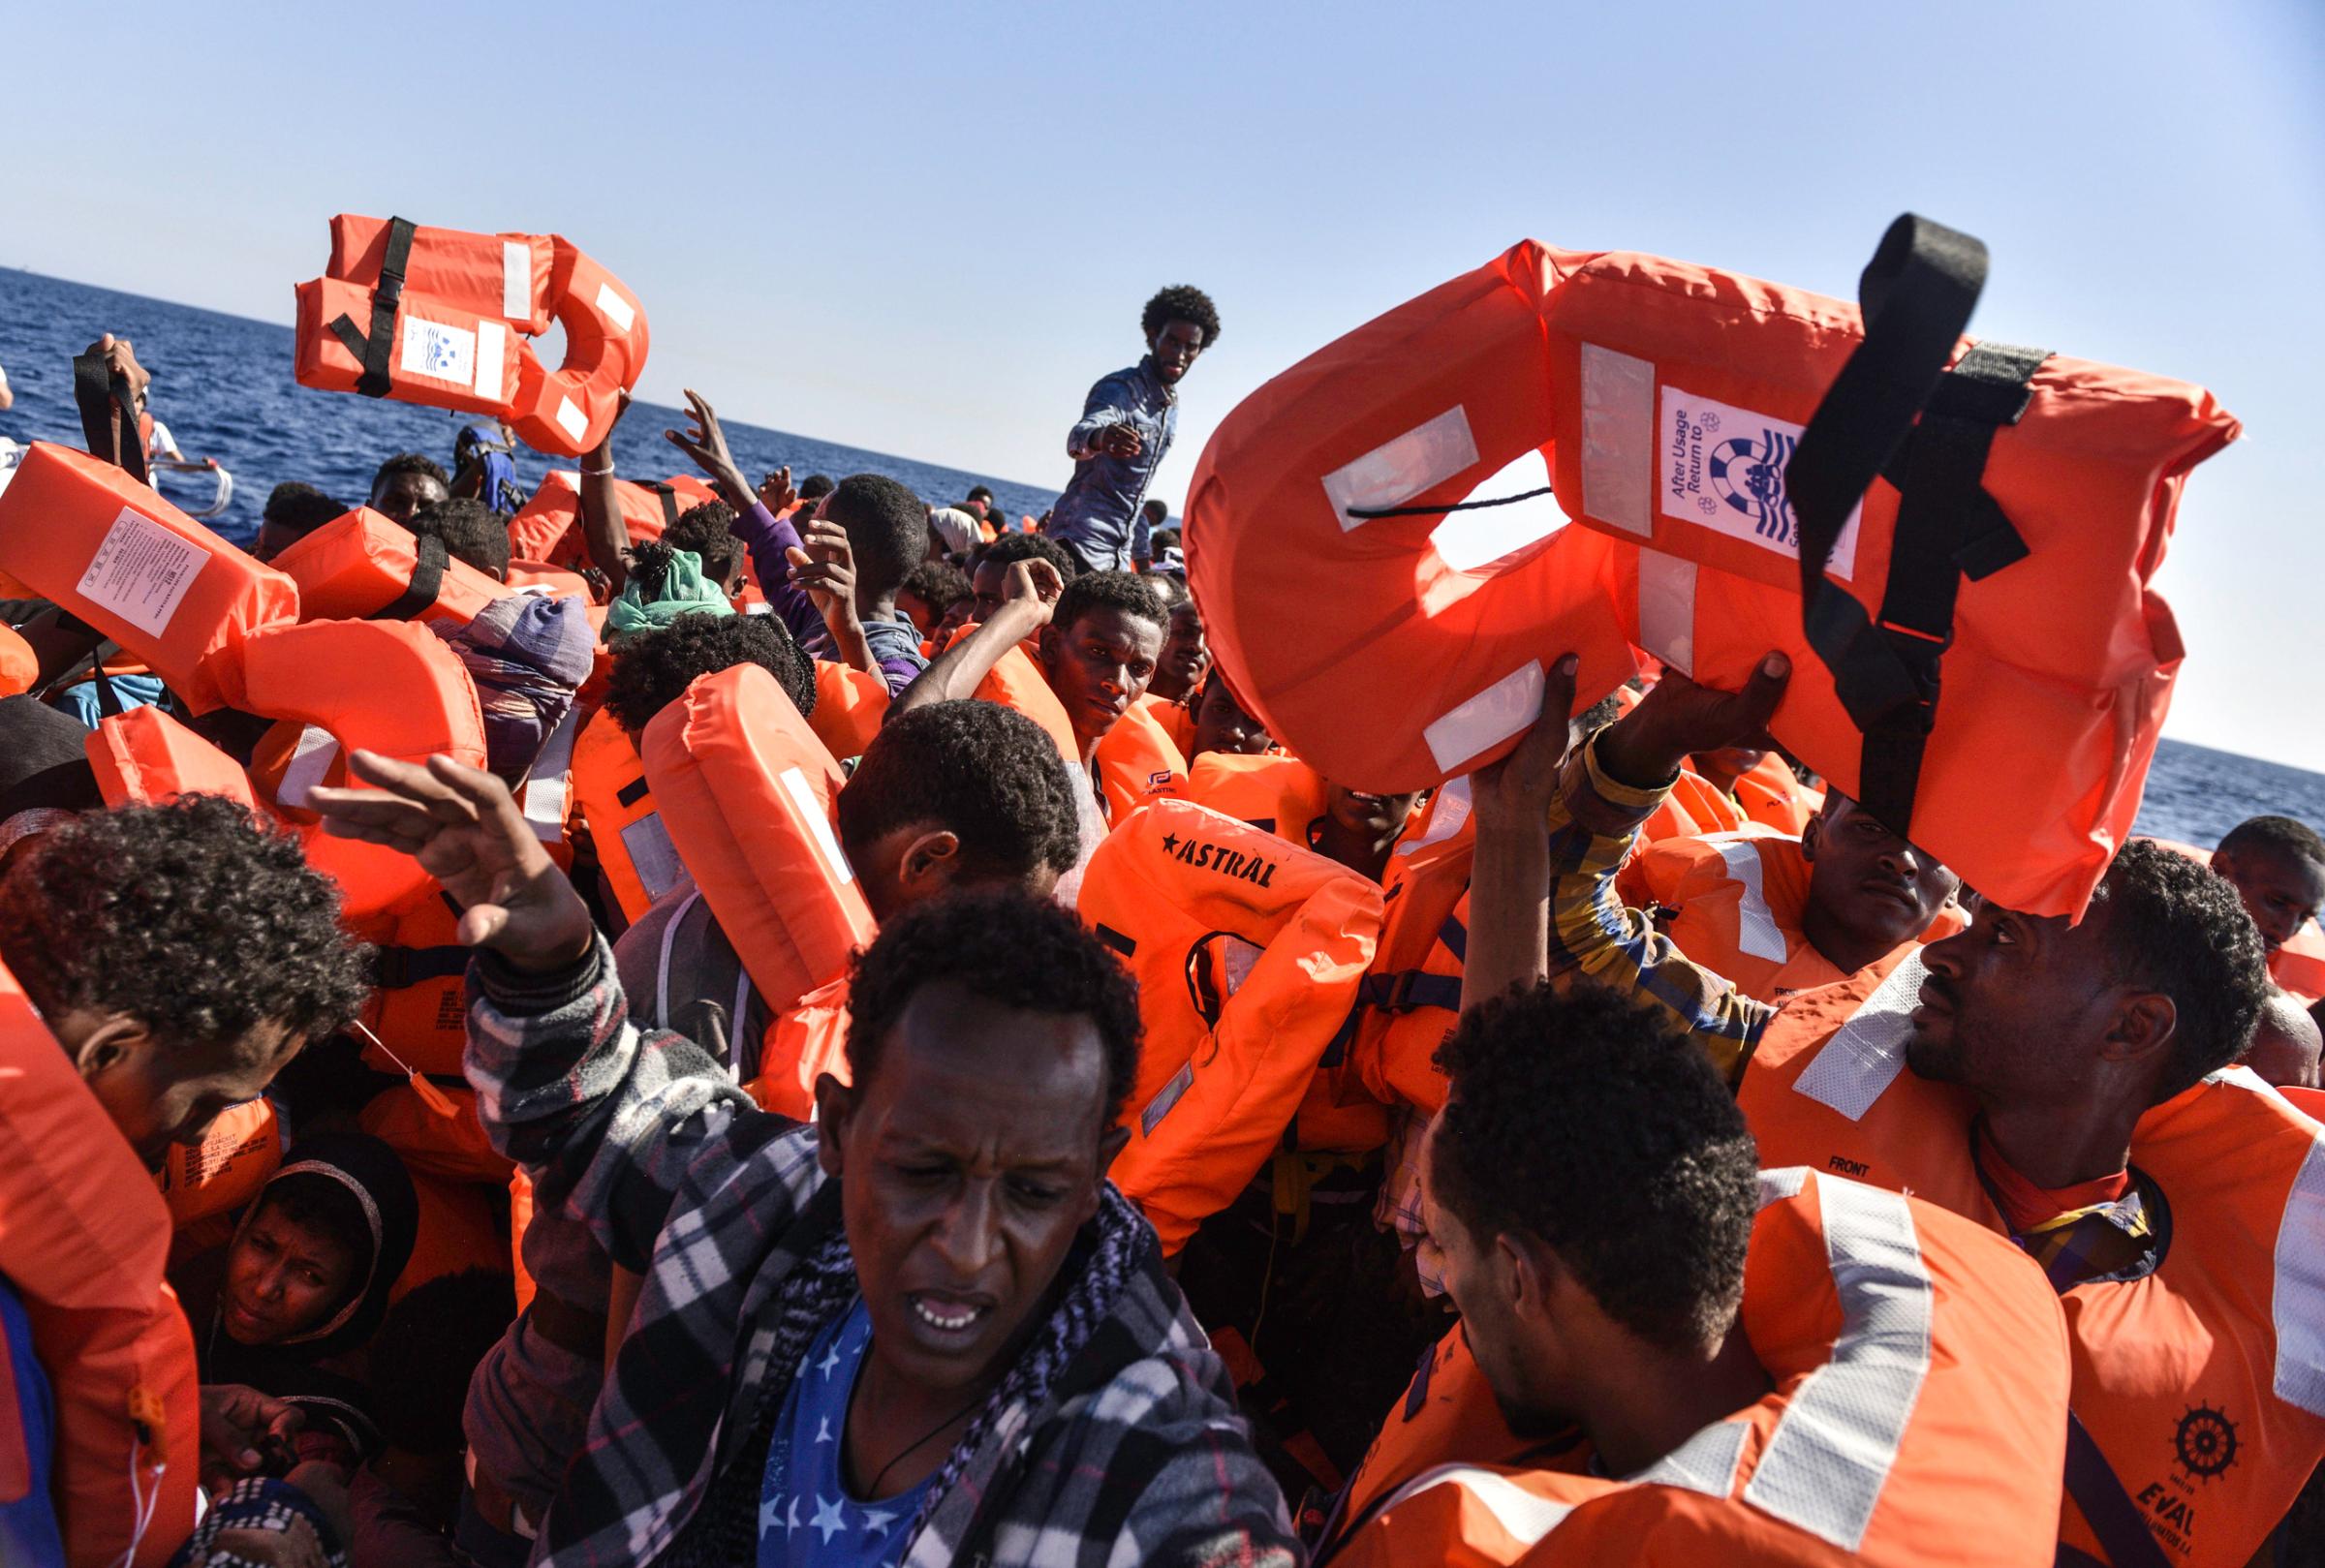 Migrants pass the life jackets being handed out by the search-and-rescue teams with Médecins Sans Frontières and SOS Méditerranée off the coast of Libya, Aug. 21, 2016.